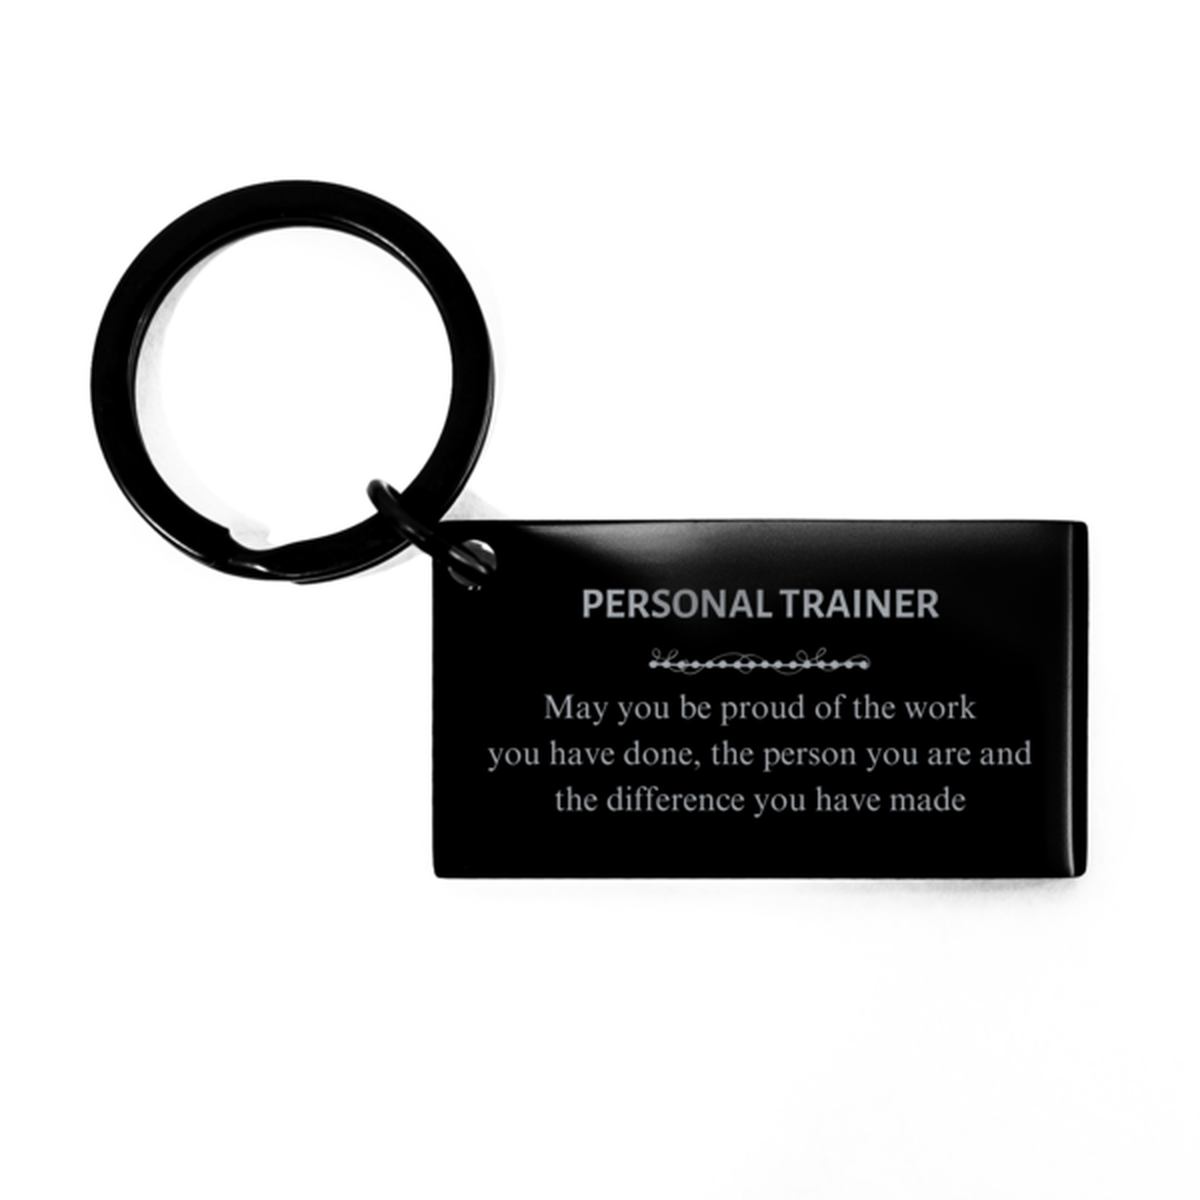 Reporter May you be proud of the work you have done, Retirement Personal Trainer Keychain for Colleague Appreciation Gifts Amazing for Personal Trainer